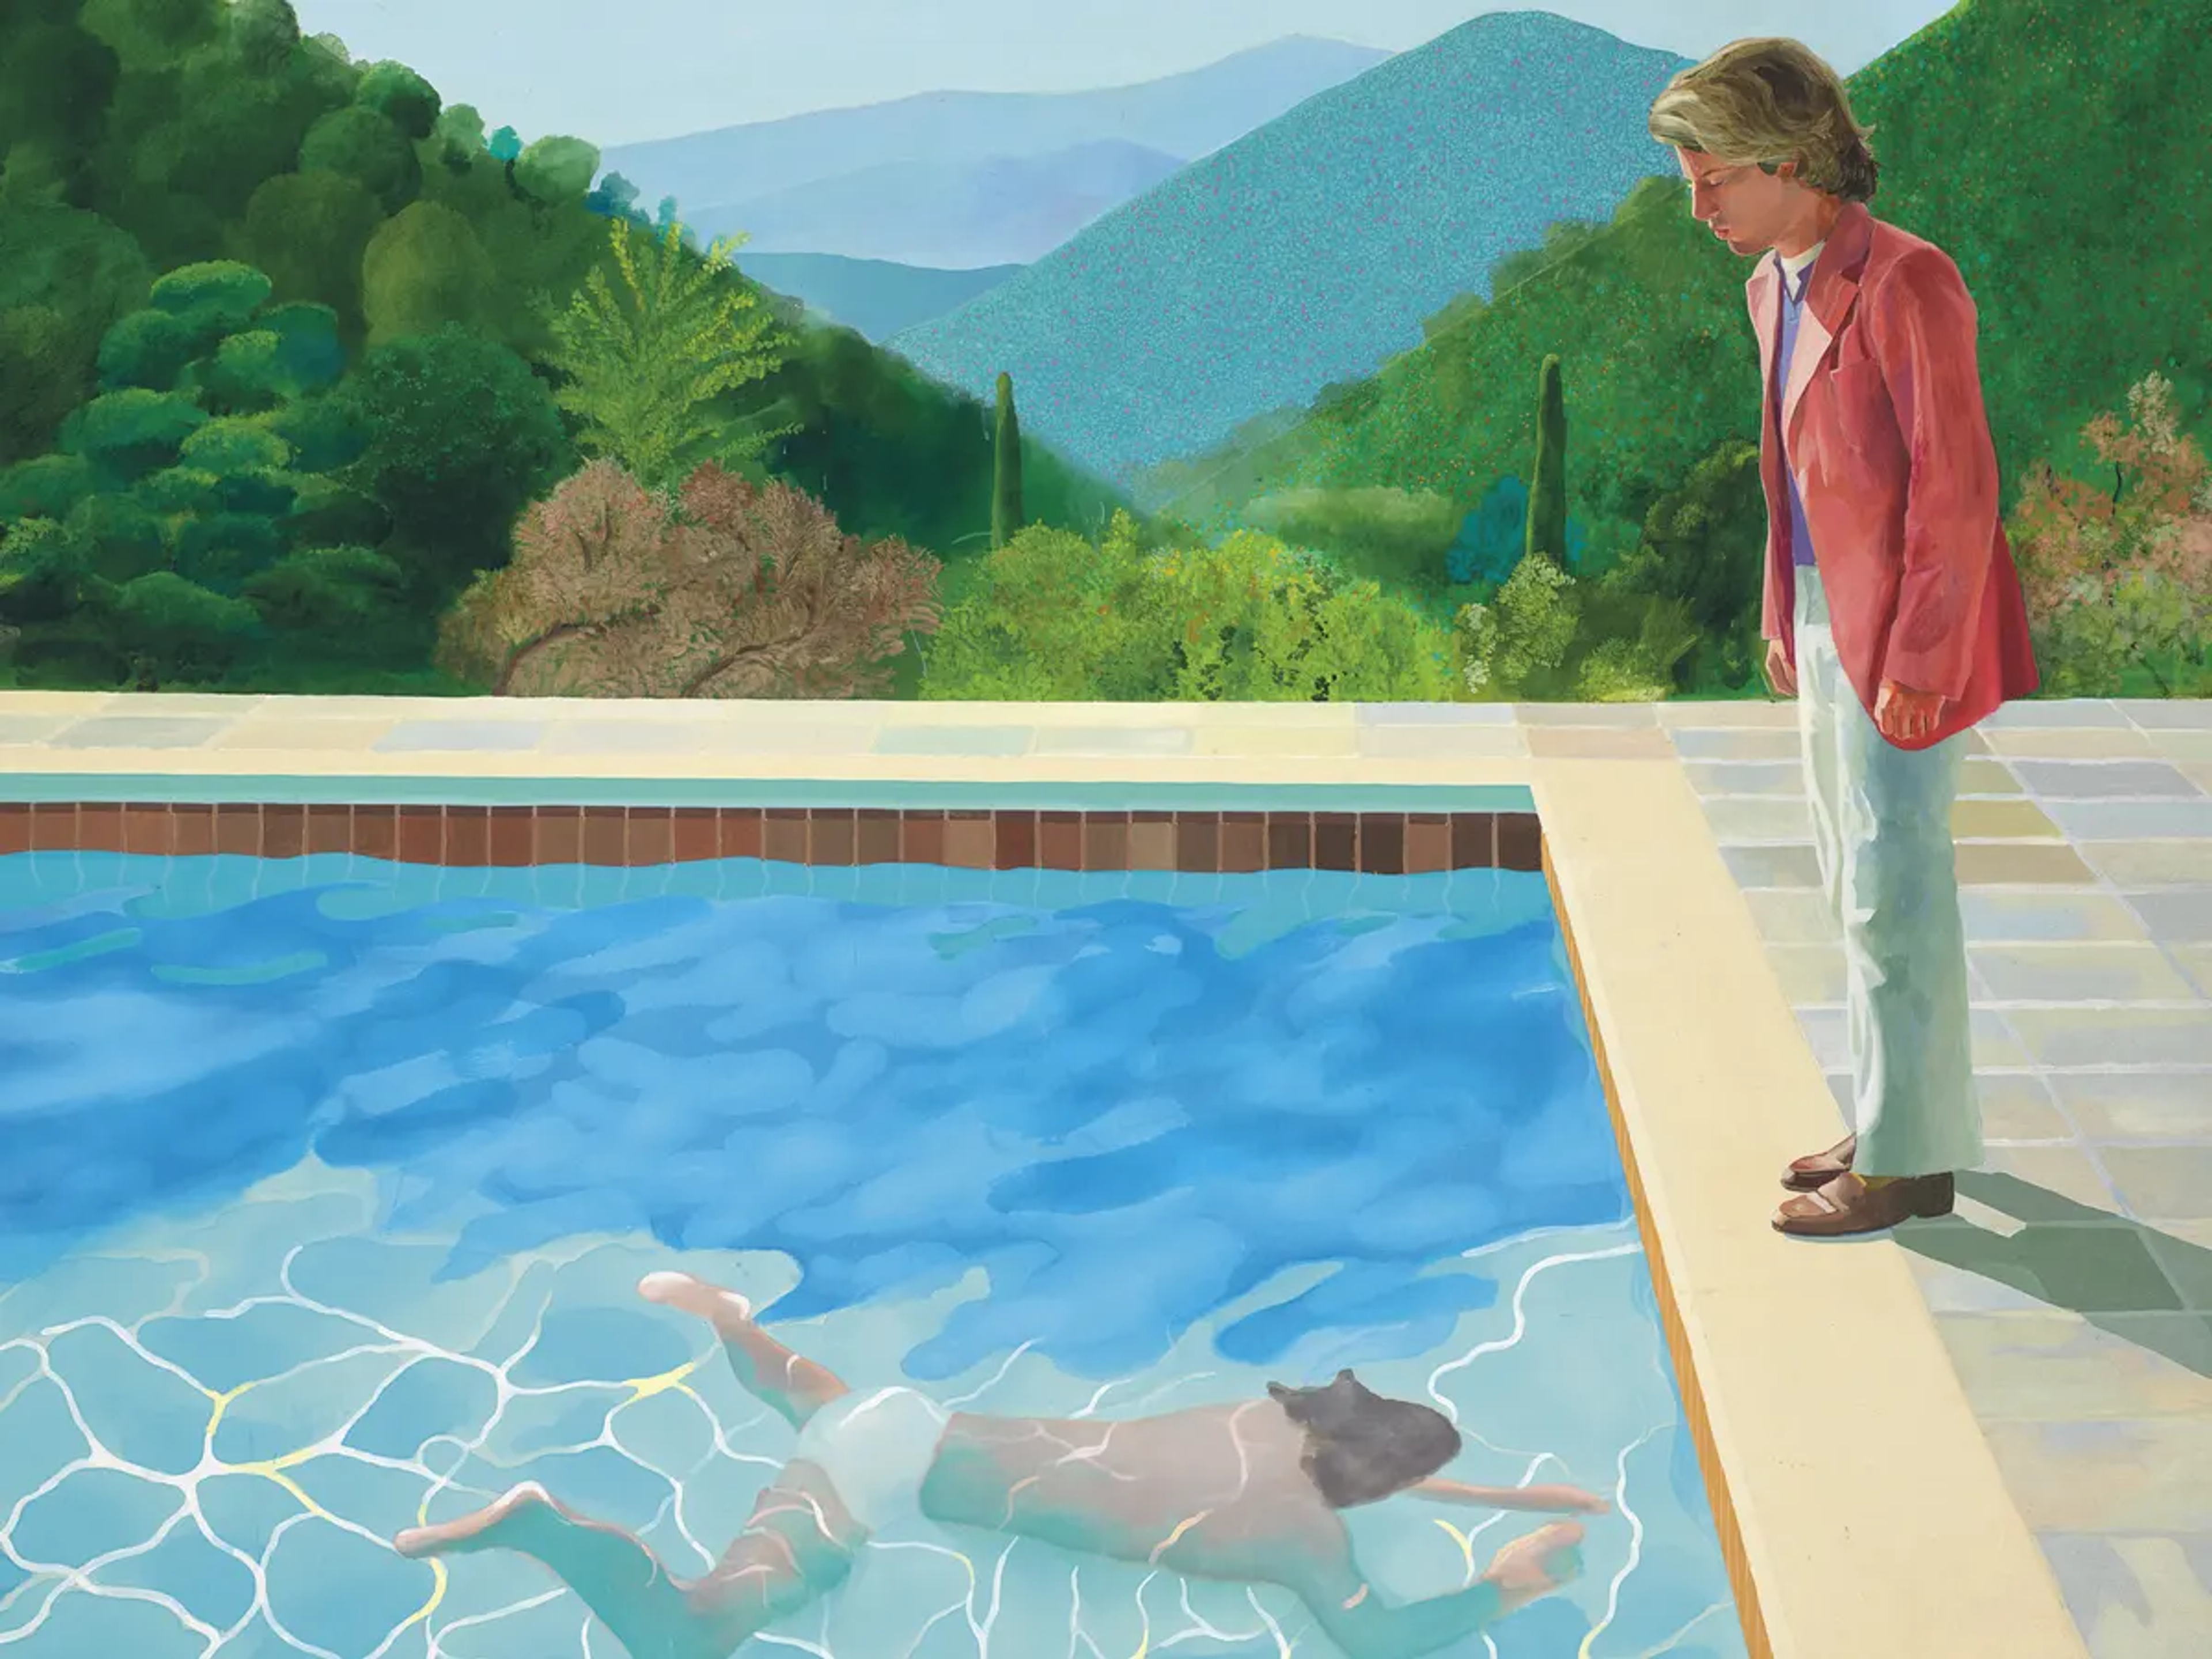 David Hockney's Portrait Of An Artist (Pool With Two Figures) 